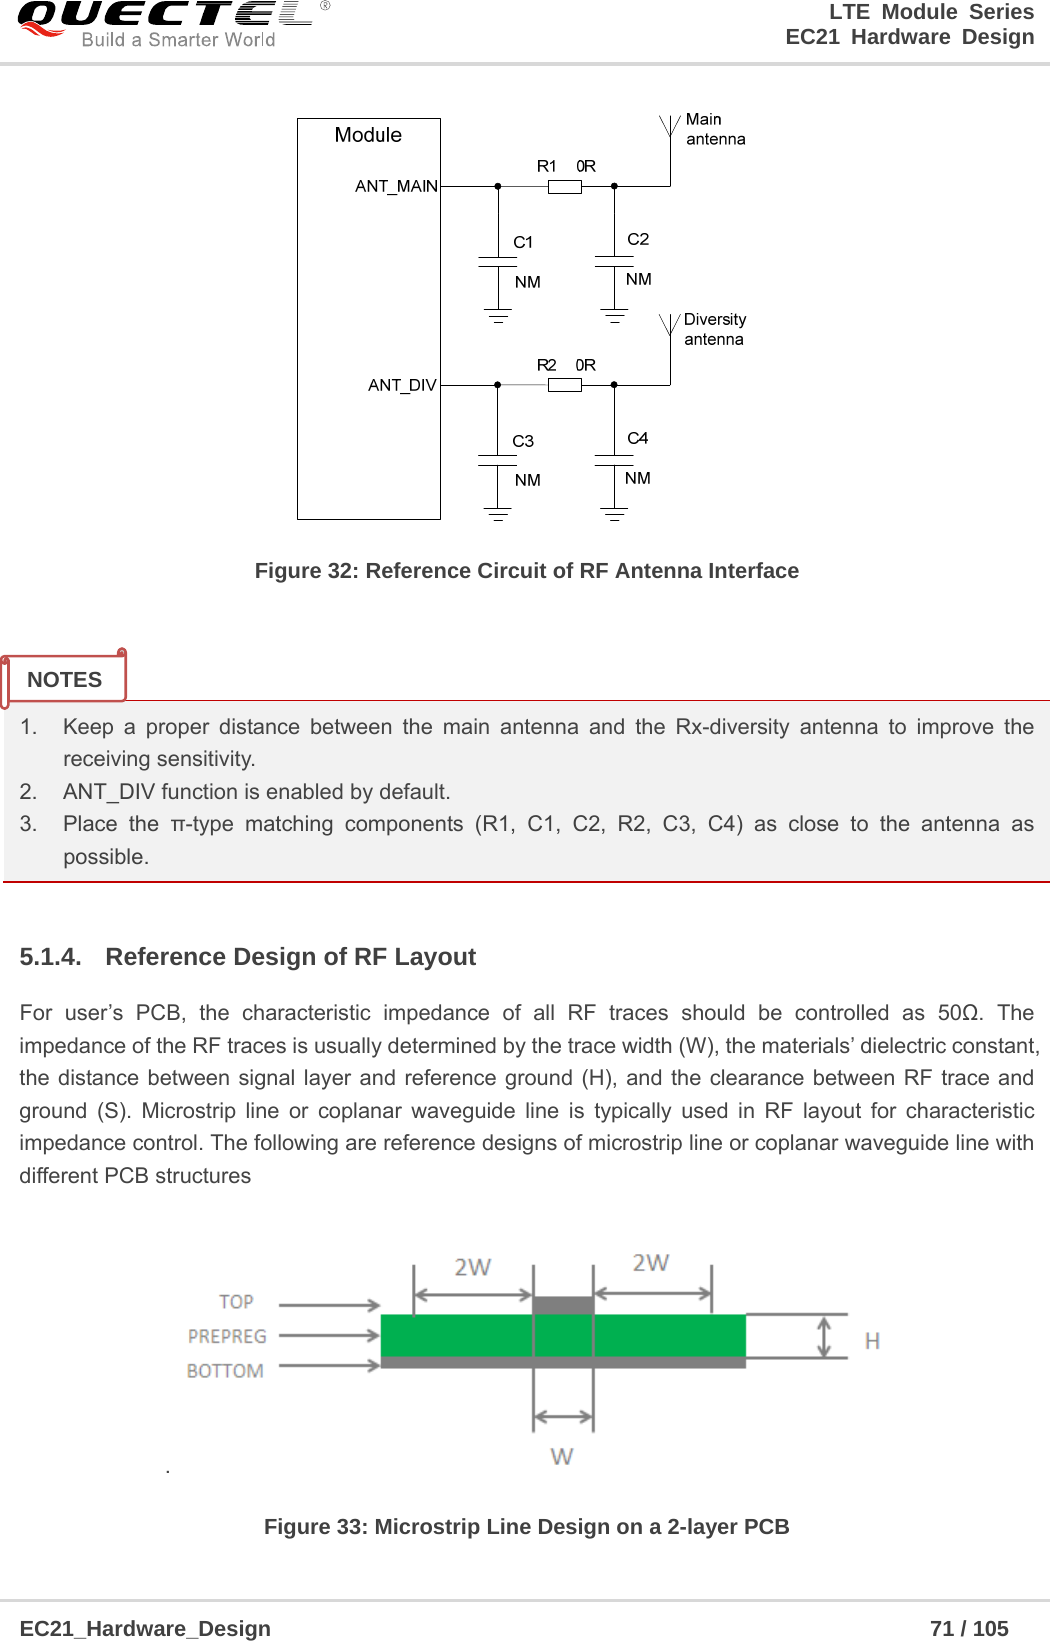                                                                        LTE Module Series                                                                 EC21 Hardware Design  EC21_Hardware_Design                                                            71 / 105     Figure 32: Reference Circuit of RF Antenna Interface   1.  Keep a proper distance between the main antenna and the Rx-diversity antenna to improve the receiving sensitivity. 2. ANT_DIV function is enabled by default. 3. Place the π-type matching components (R1, C1, C2, R2, C3, C4) as close to the antenna as possible.  5.1.4.  Reference Design of RF Layout   For user’s PCB, the characteristic impedance of all RF traces should be controlled as 50Ω. The impedance of the RF traces is usually determined by the trace width (W), the materials’ dielectric constant, the distance between signal layer and reference ground (H), and the clearance between RF trace and ground (S). Microstrip line or coplanar waveguide line is typically used in RF layout for characteristic impedance control. The following are reference designs of microstrip line or coplanar waveguide line with different PCB structures .   Figure 33: Microstrip Line Design on a 2-layer PCB NOTES 